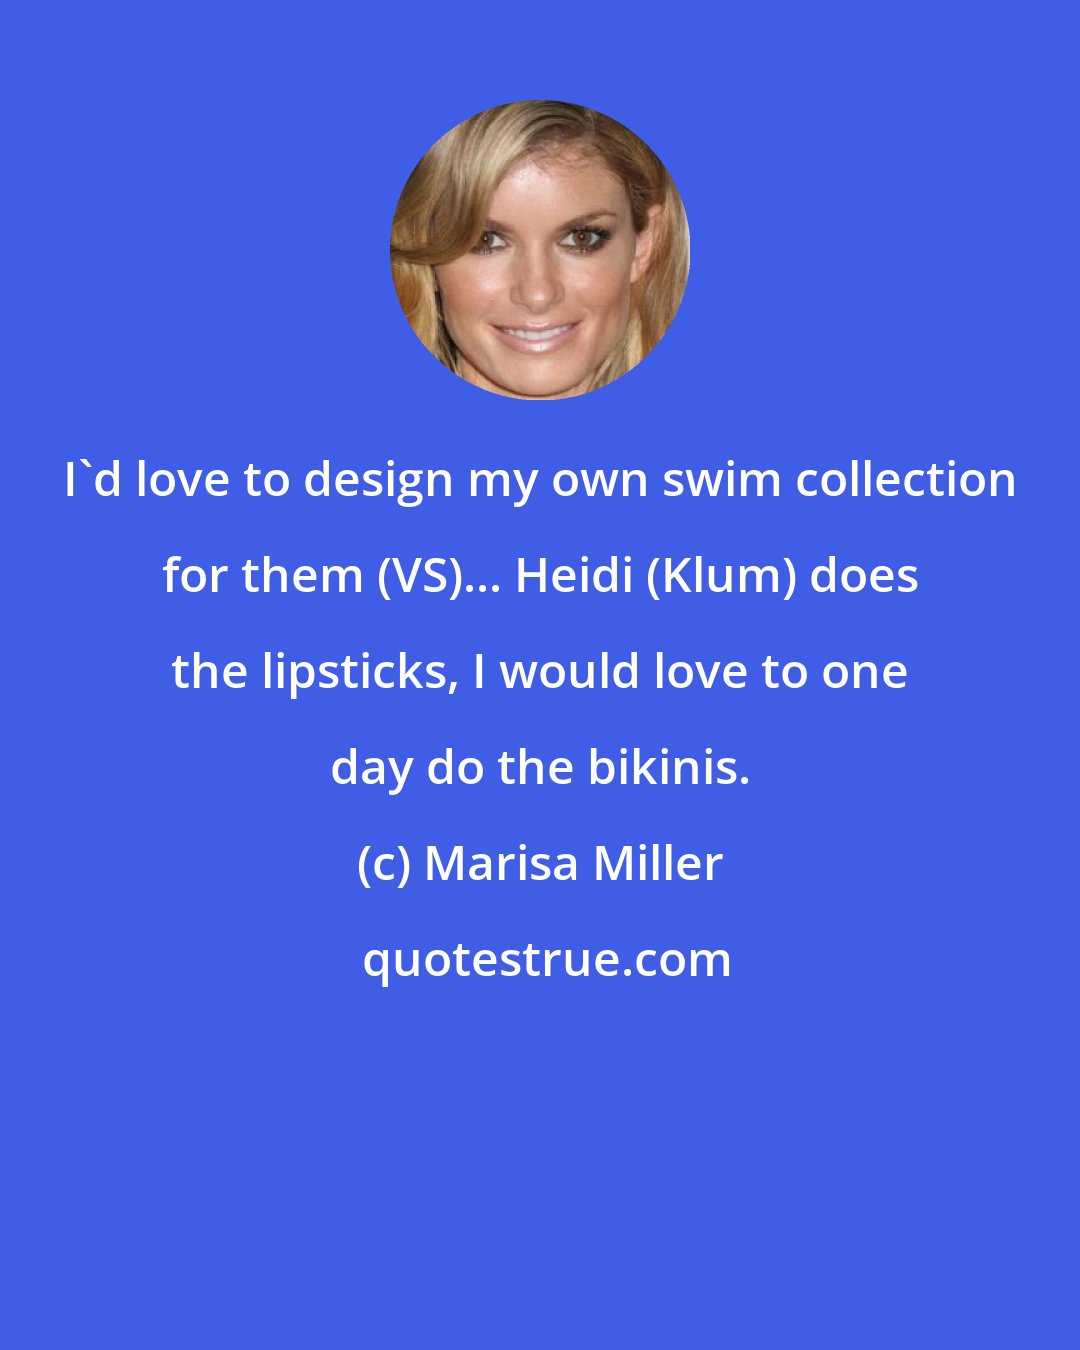 Marisa Miller: I'd love to design my own swim collection for them (VS)... Heidi (Klum) does the lipsticks, I would love to one day do the bikinis.